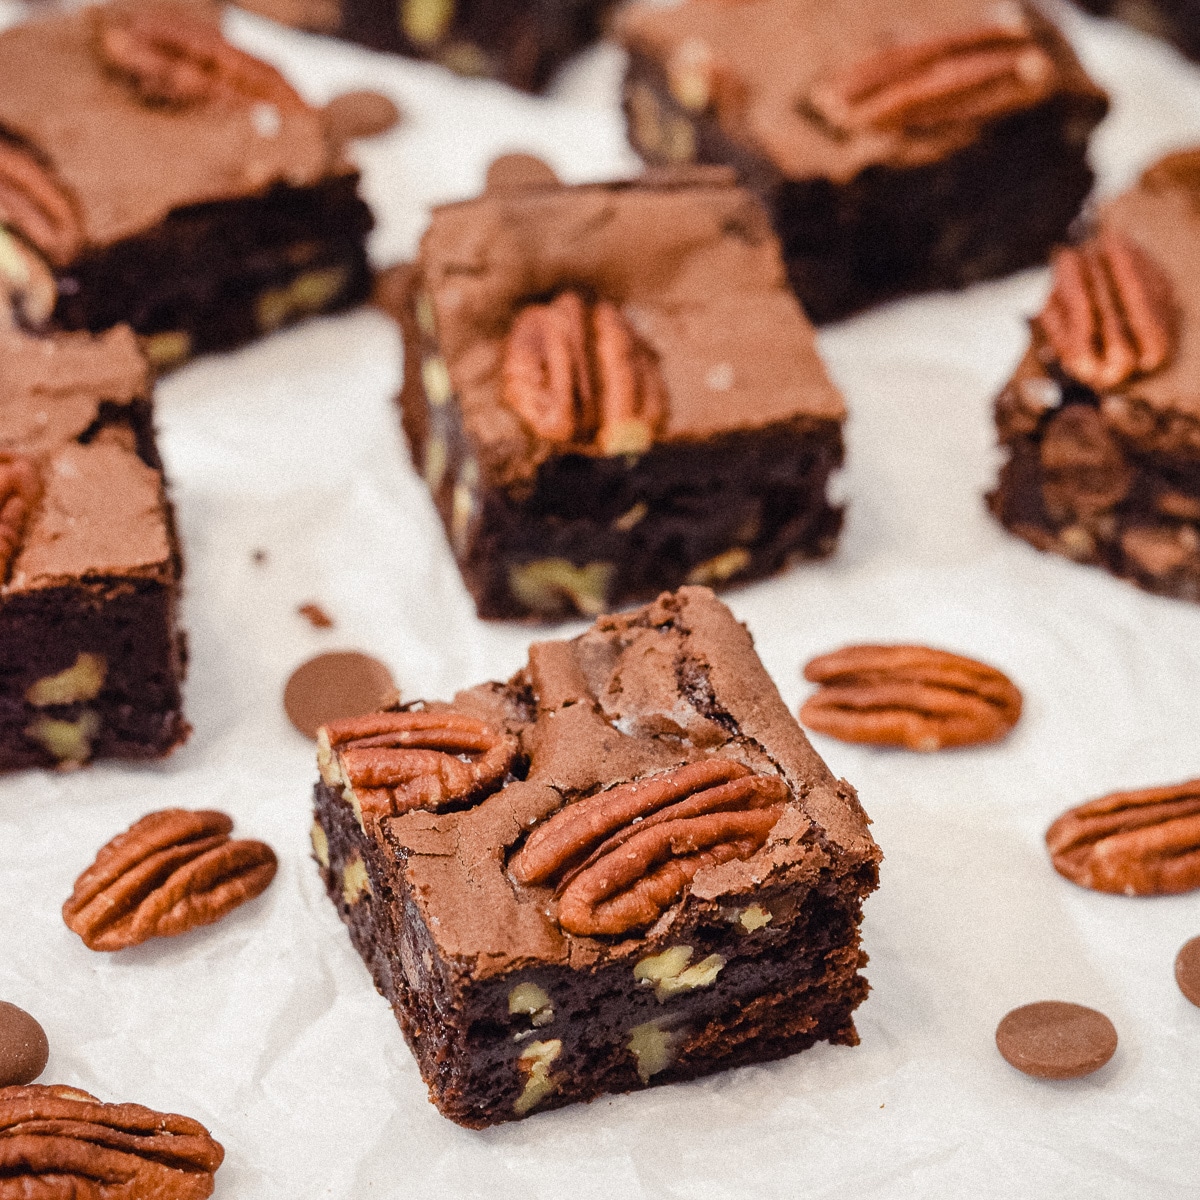 Pecan brownies cut into squares with scattered pecans and chocolate chips